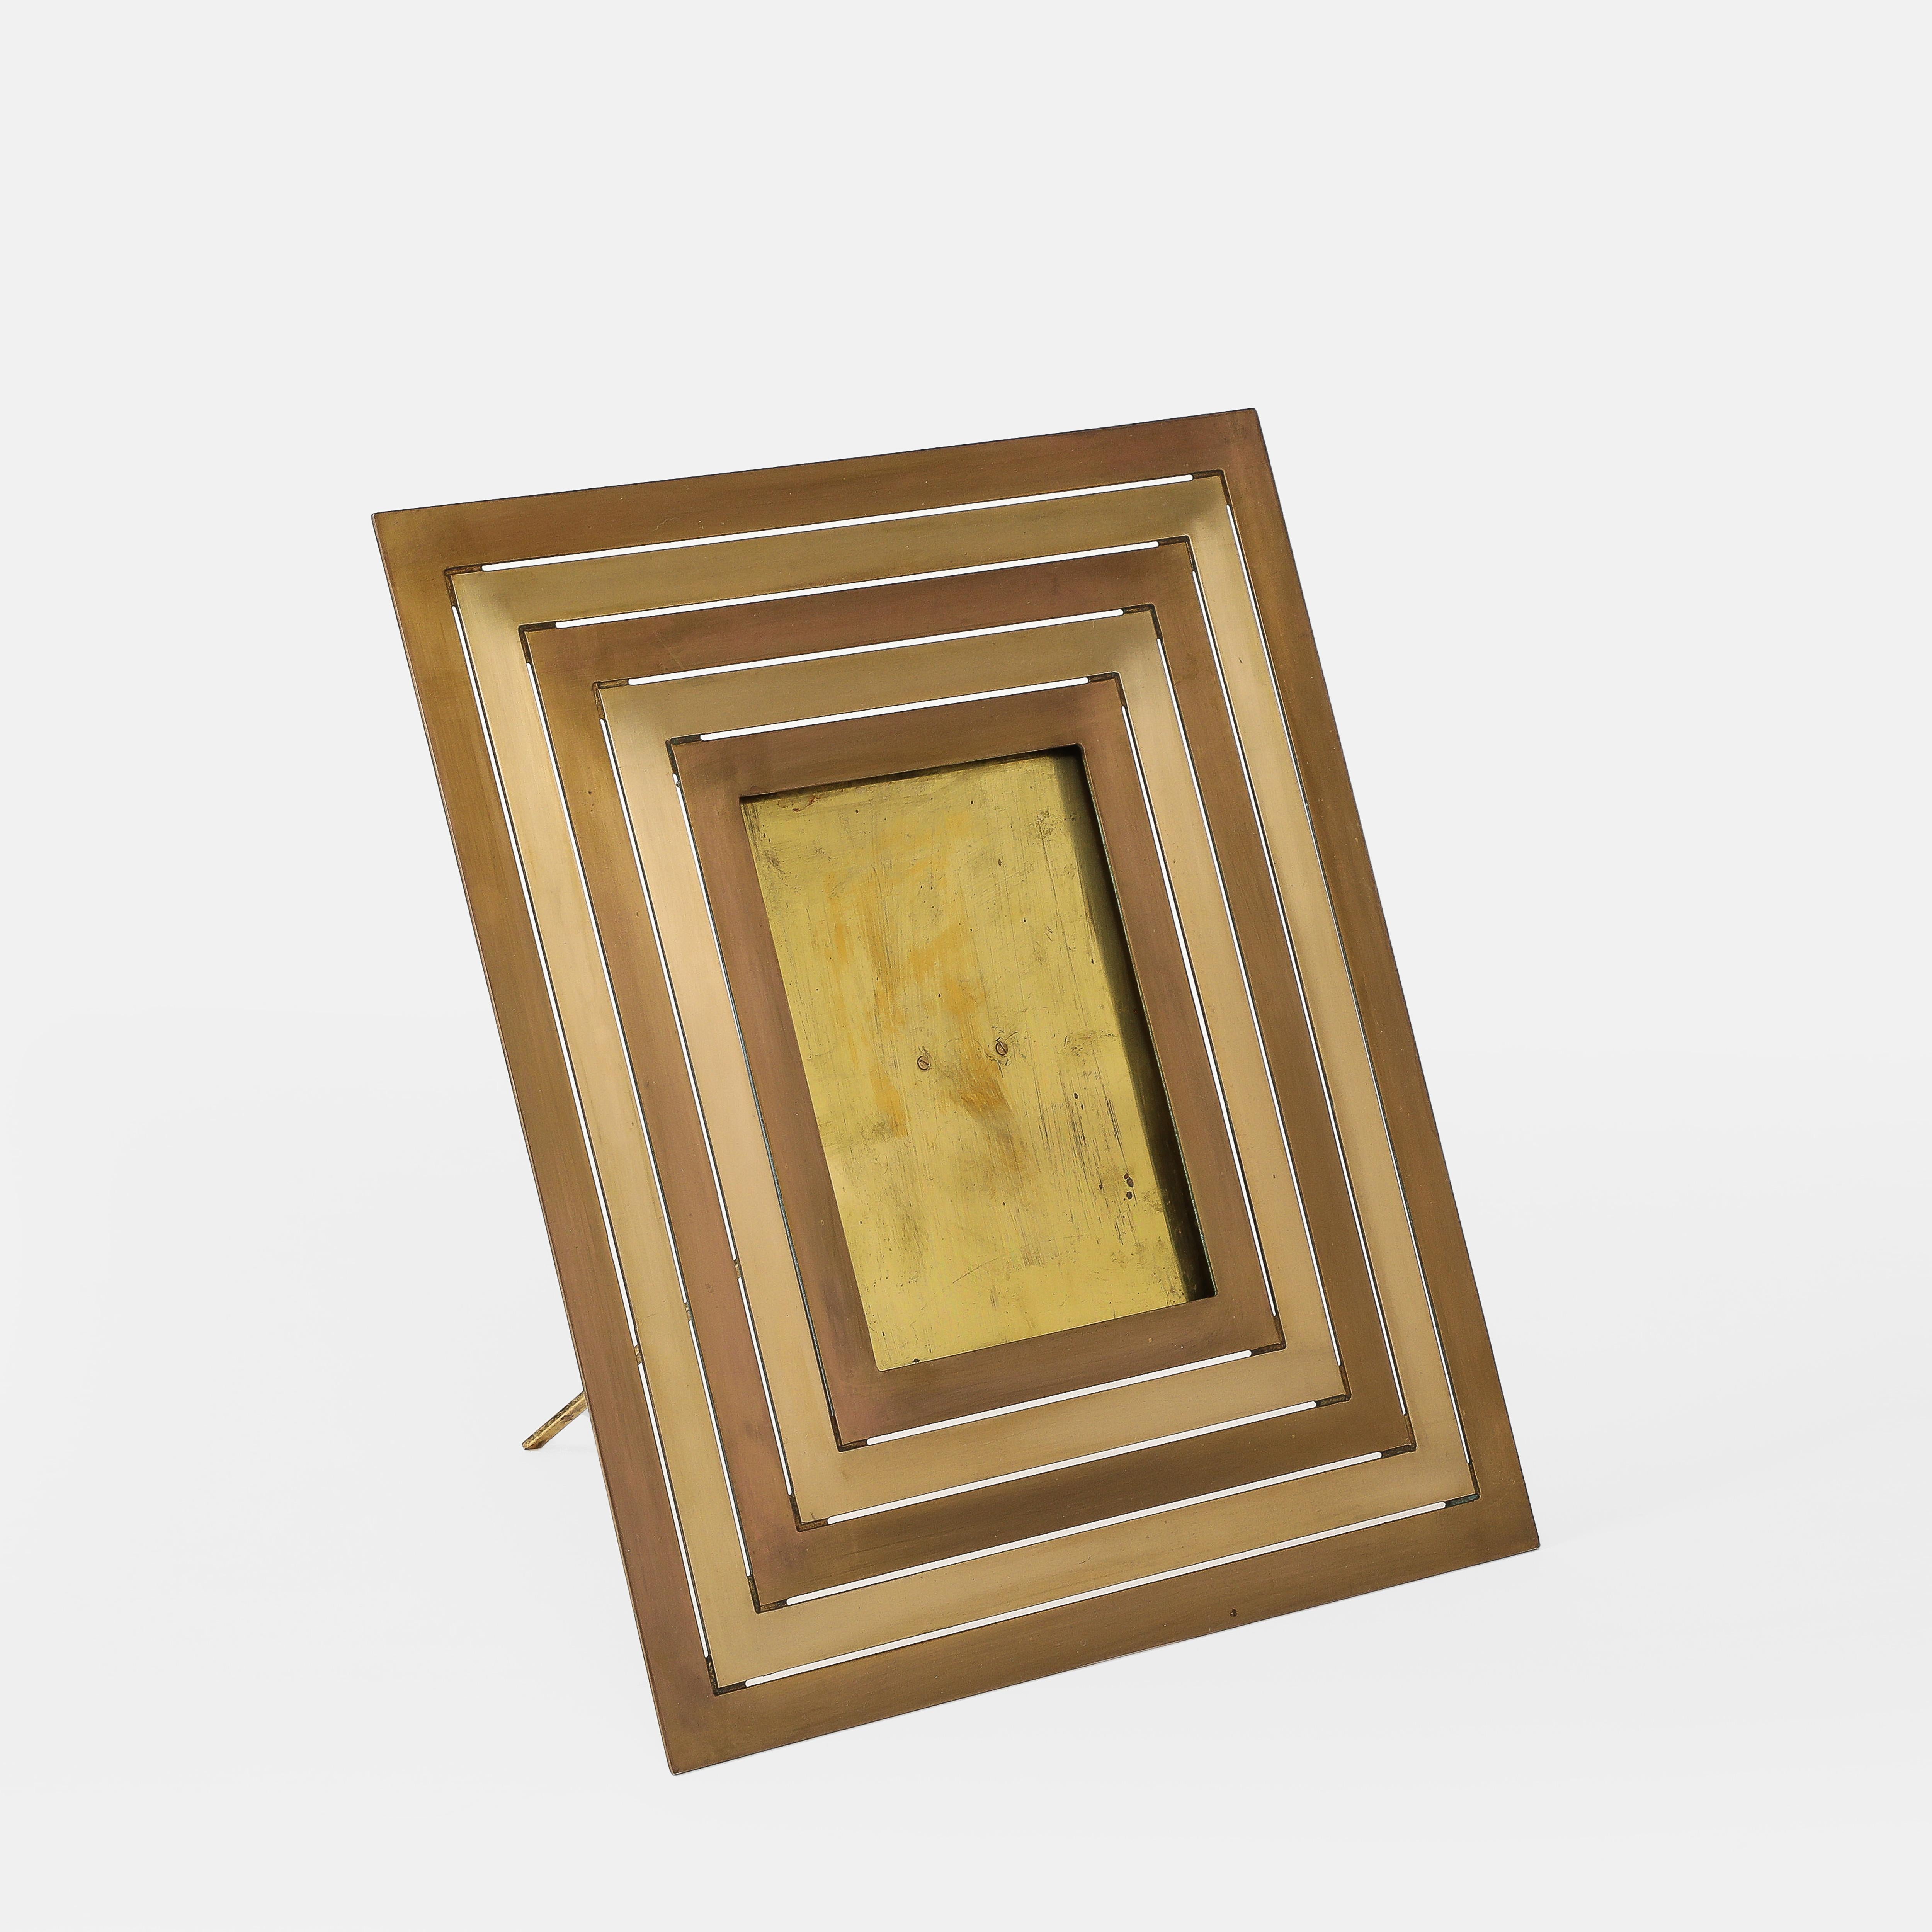 Gabriella Crespi large rectangular picture frame with alternating bands of polished and brushed brass, Italy, 1970s.  This incredibly chic picture frame is a striking example of the glamorous and iconic Crespi design of the 1970s.
Impressed with